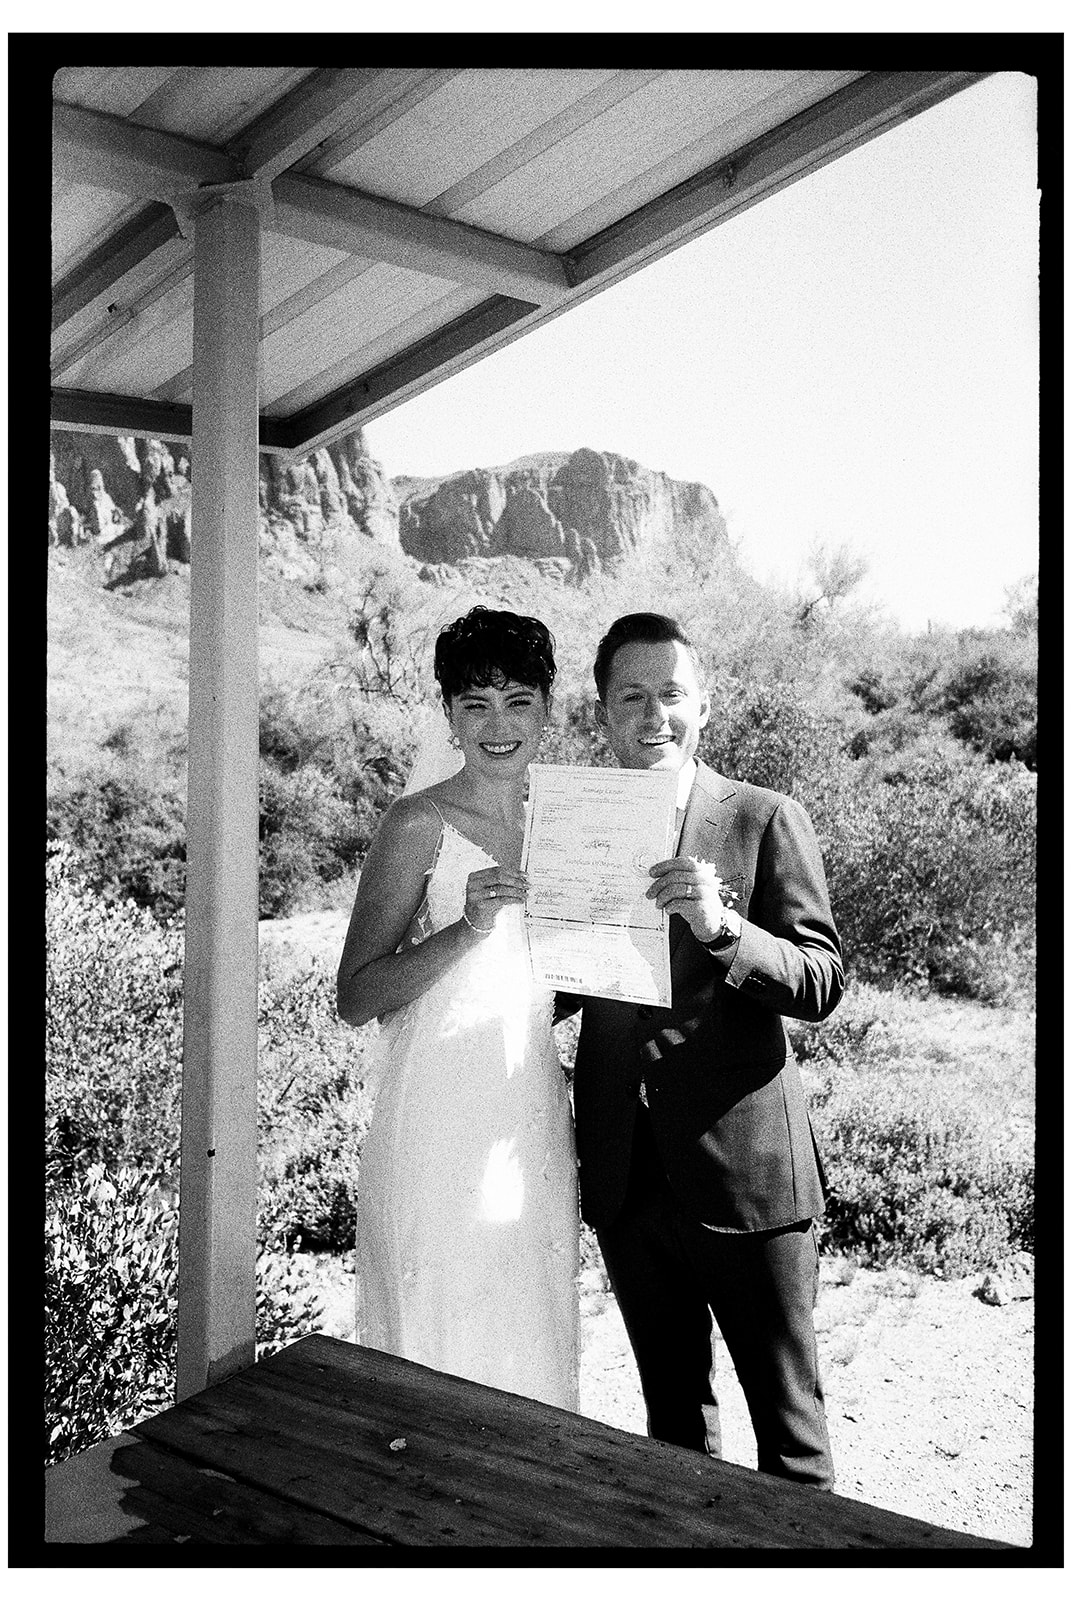 A newlywed couple shows off their marriage certificate with smiles, standing under a gazebo in a desert landscape at their garden party wedding